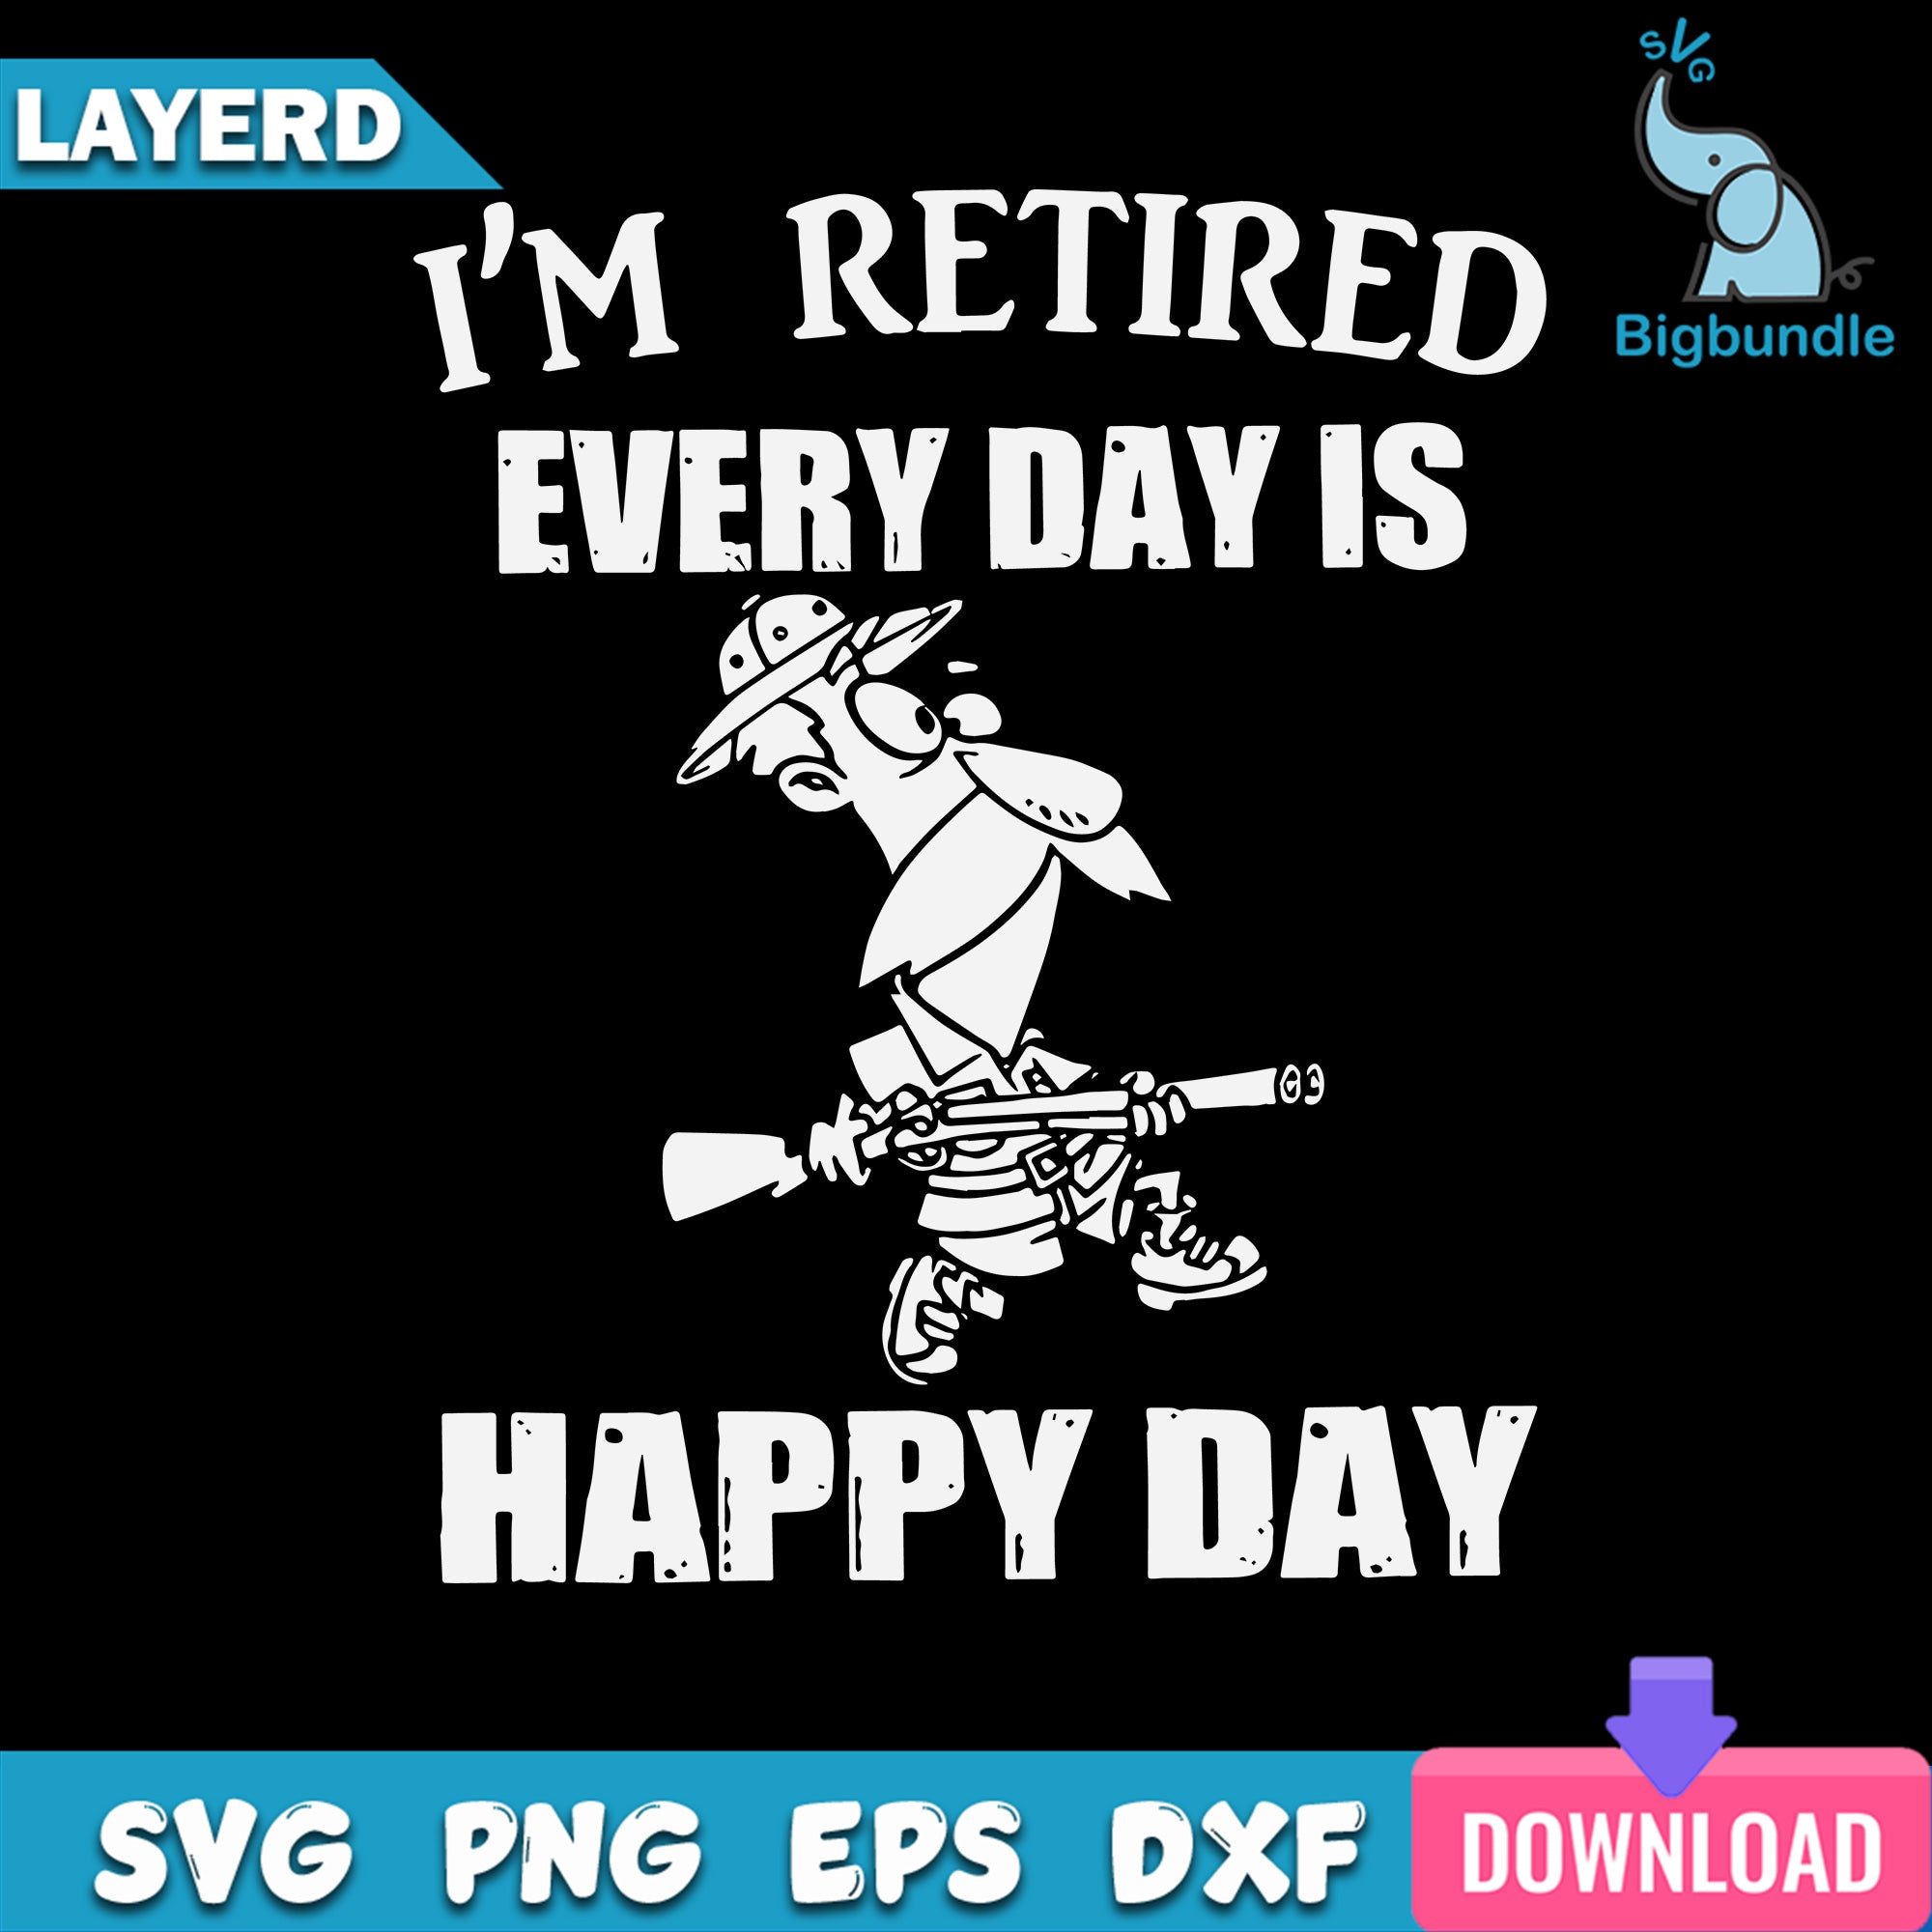 I'm Retired Every Day Is Happy Day SVG, Hunter SVG, Happy Day SVG